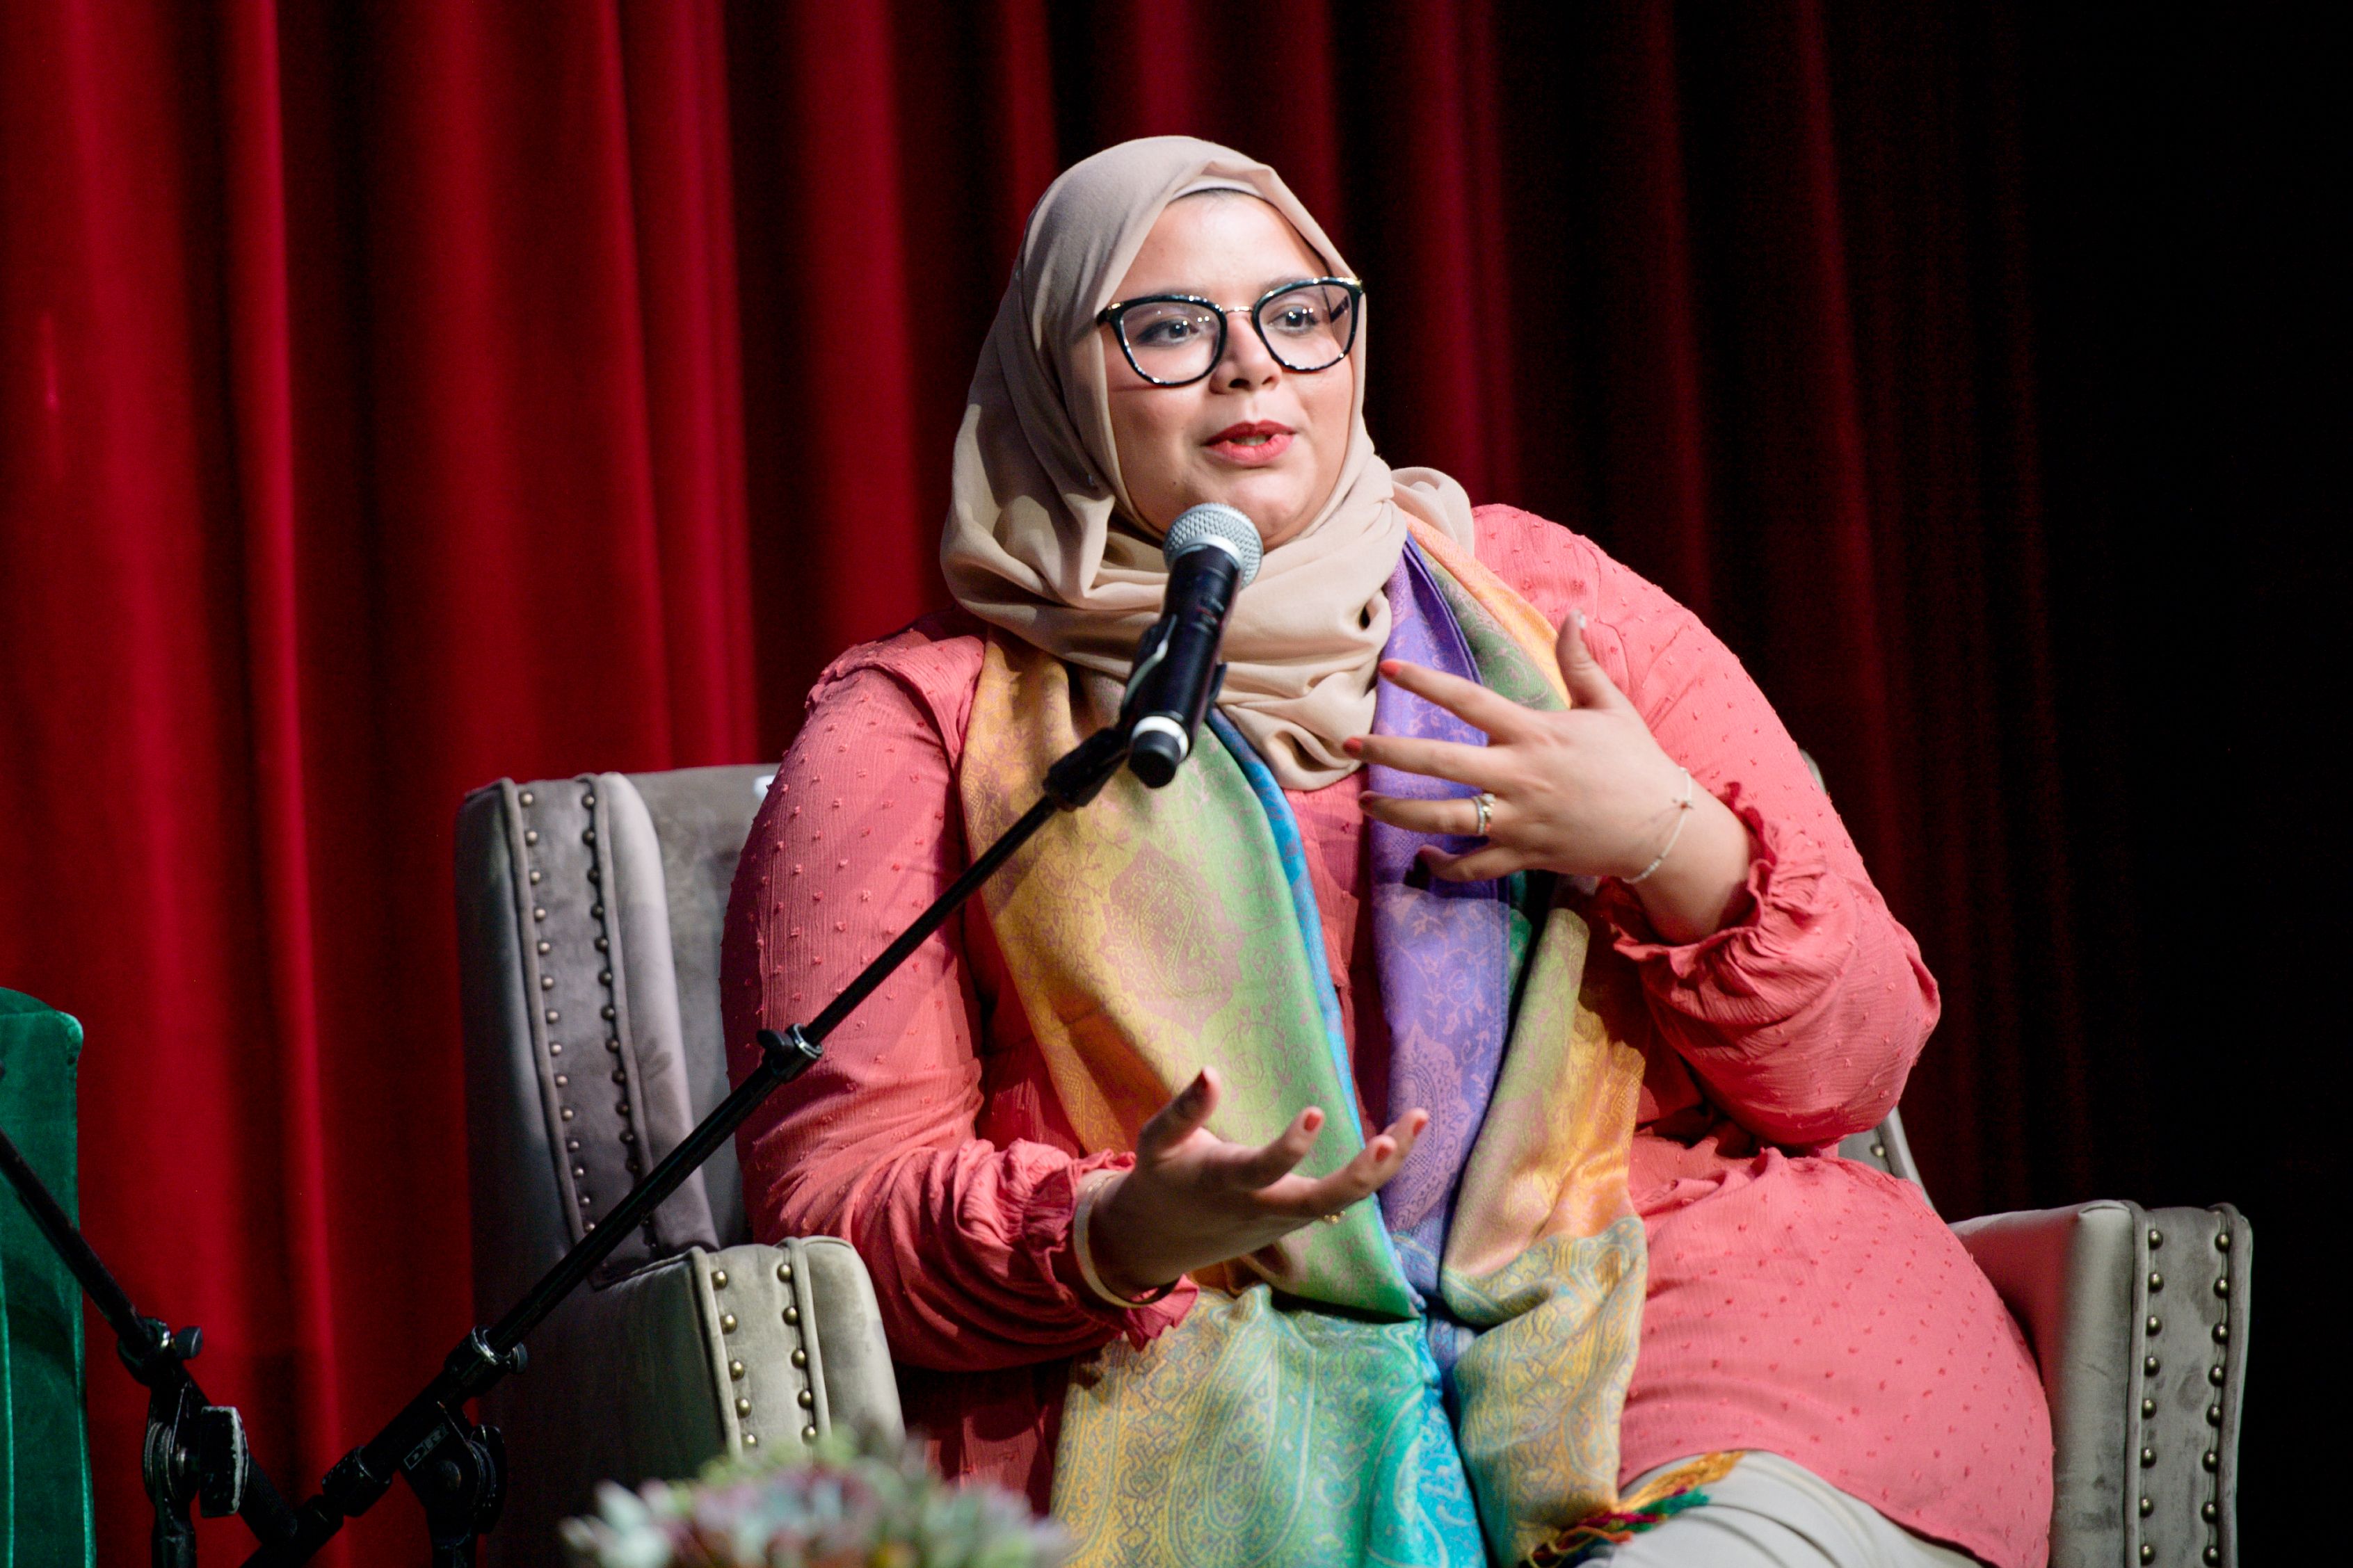 A woman wearing a hijab and glasses speaks into a microphone while sitting on a stage